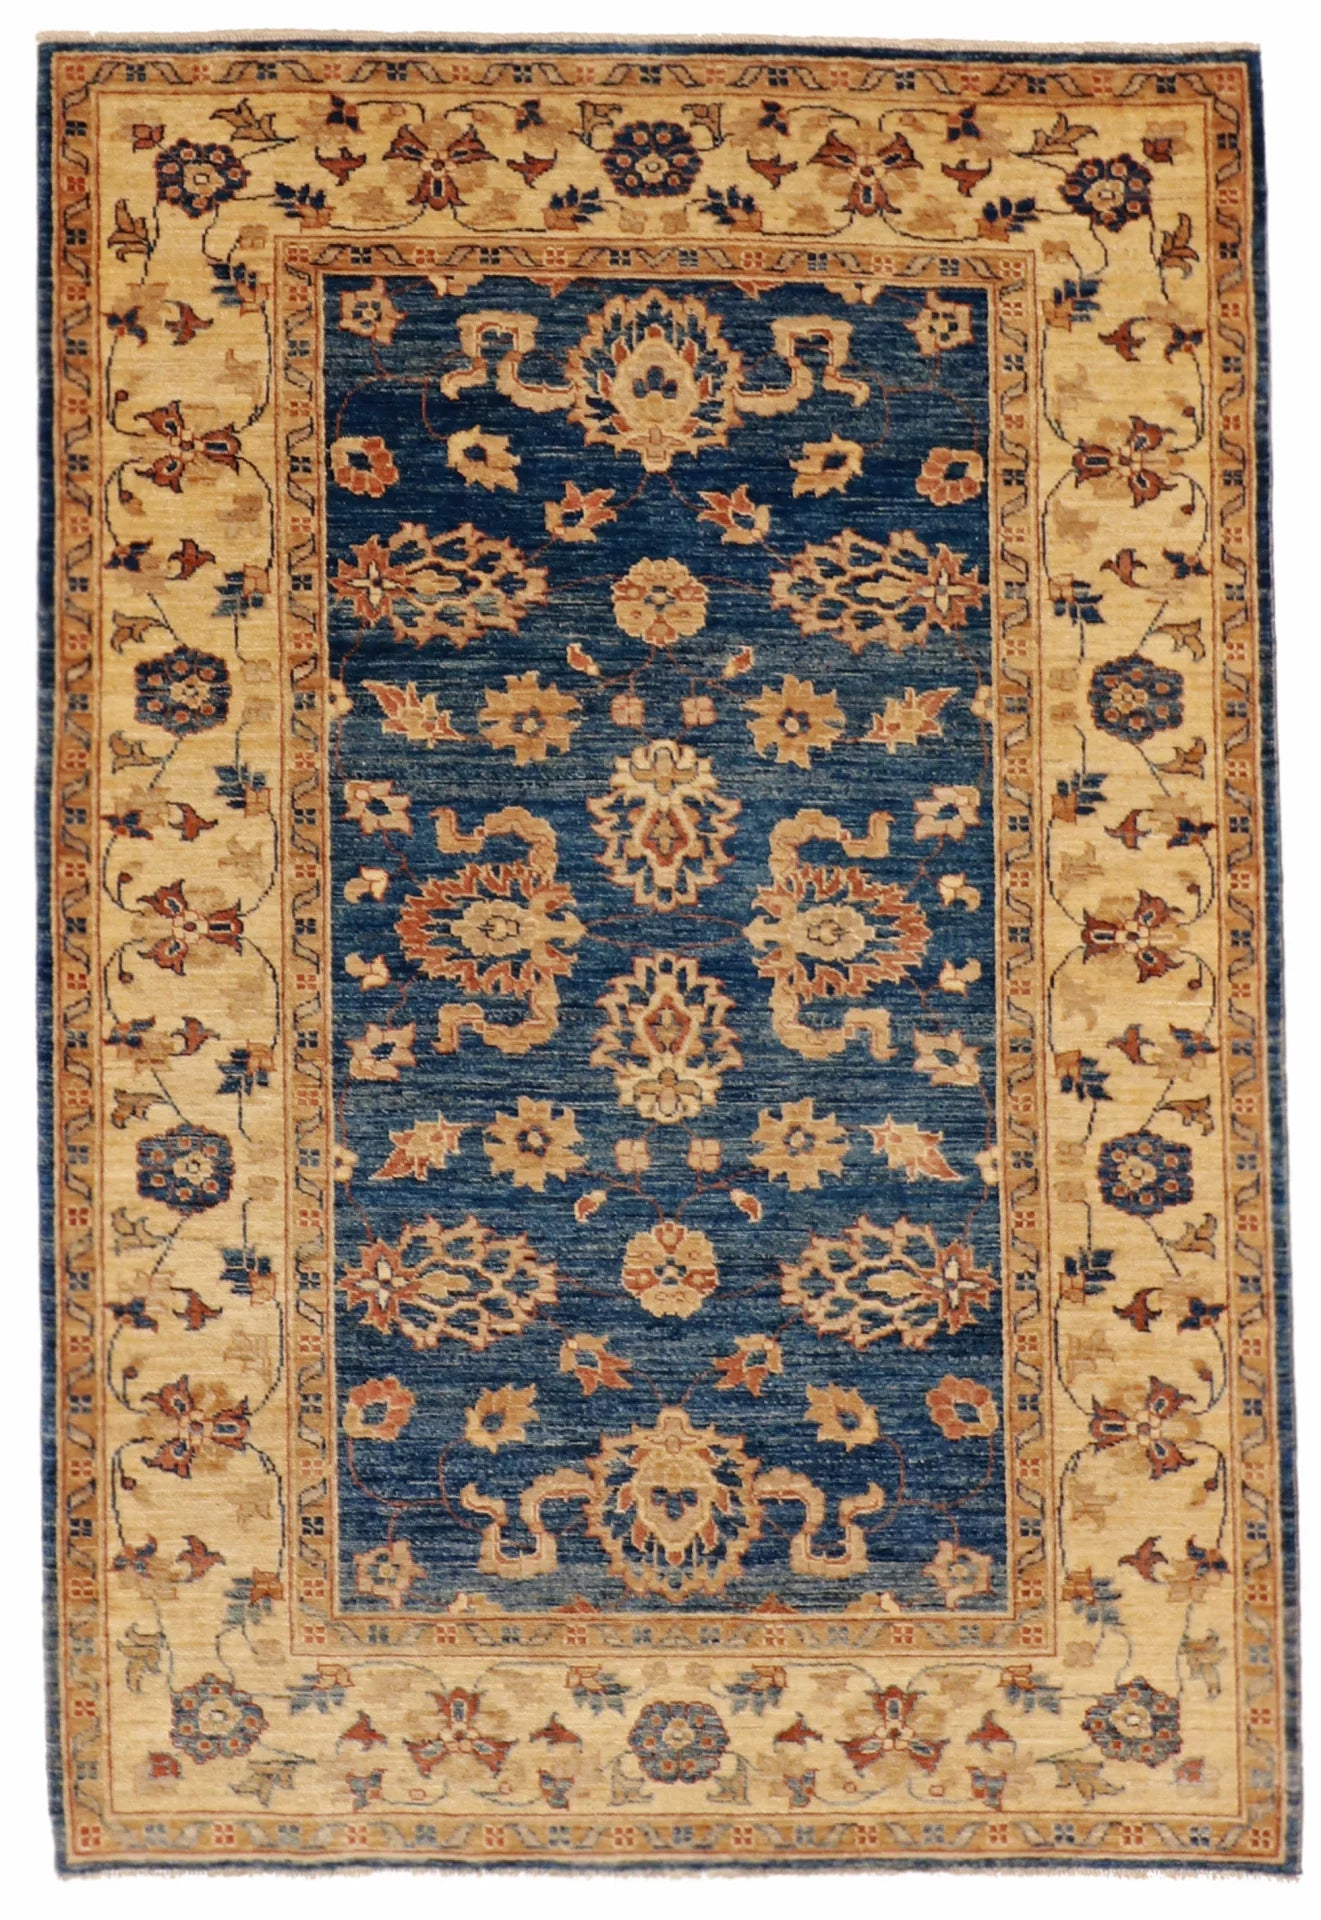 4.1x5.11 - Zeigler Fine/Wool All Over Rectangle - Hand Knotted Rug